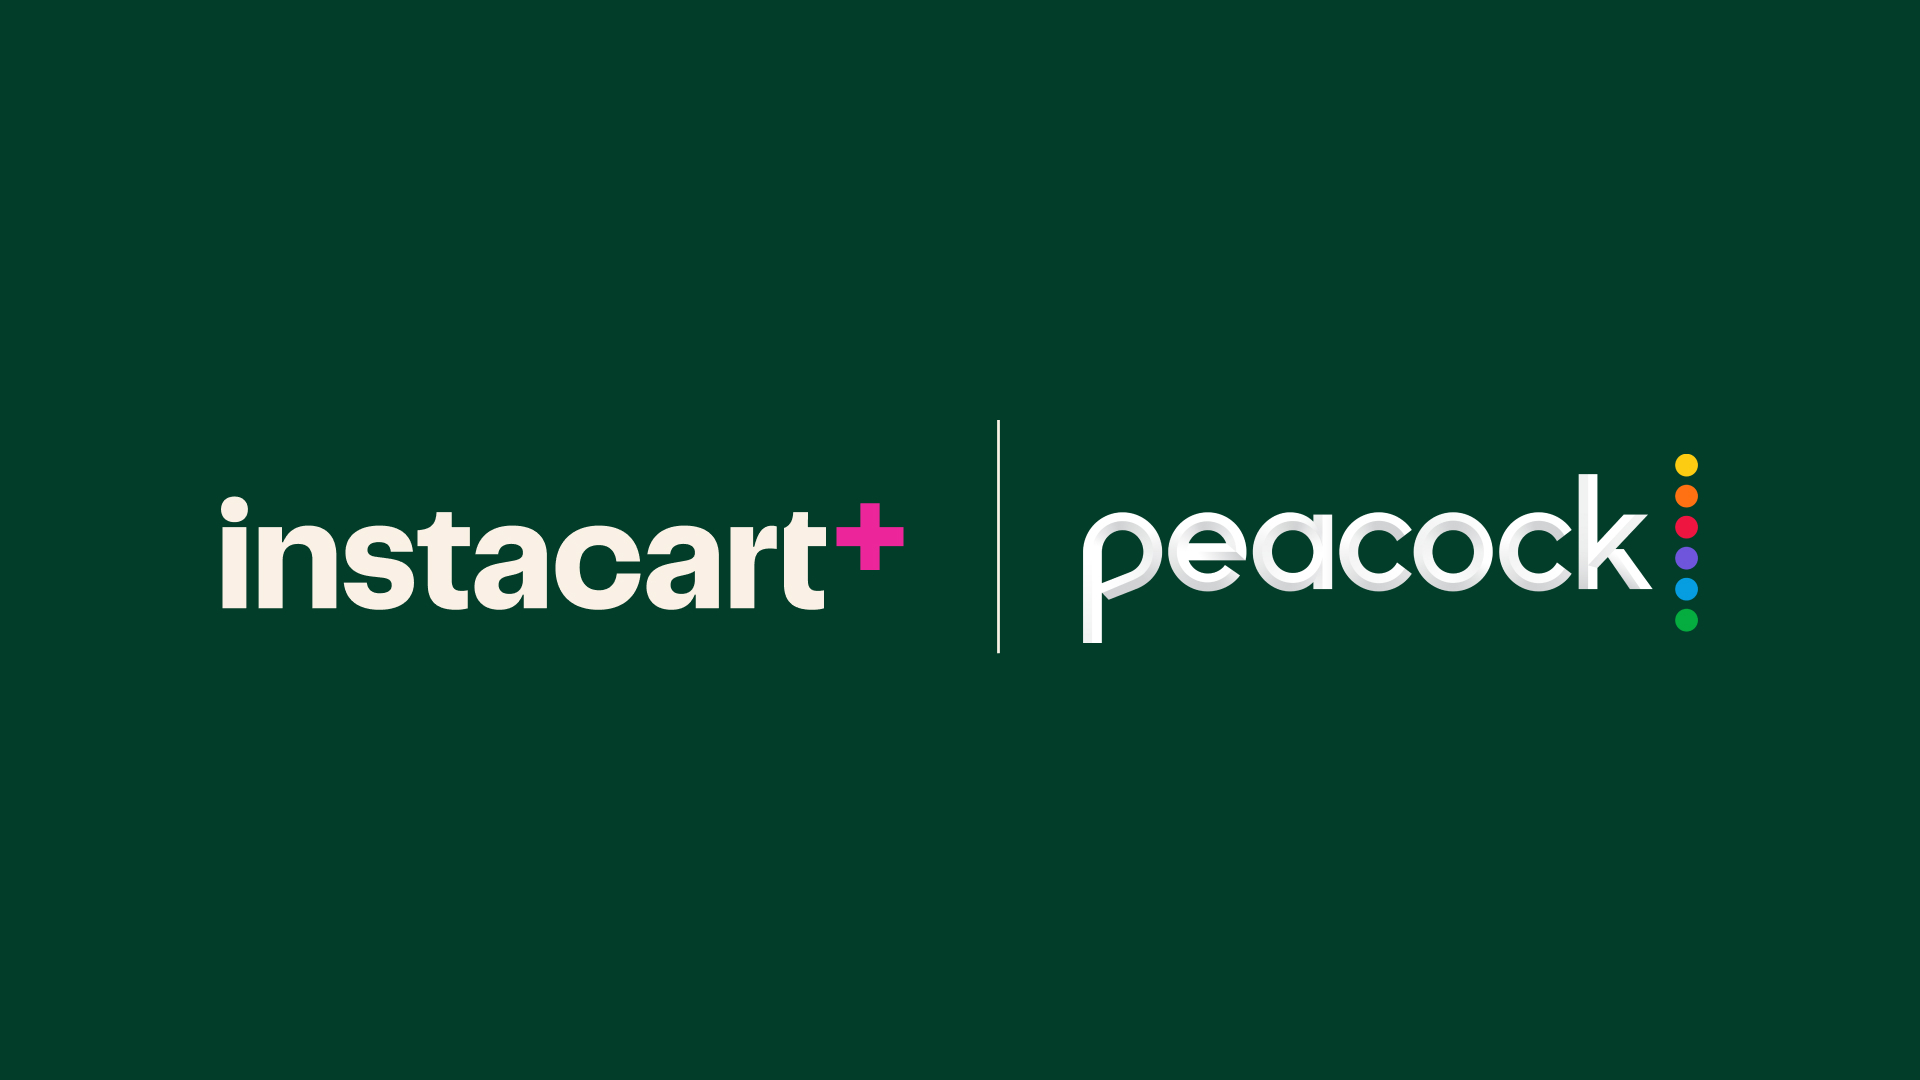 Peacock is Now Free to All Instacart+ Members